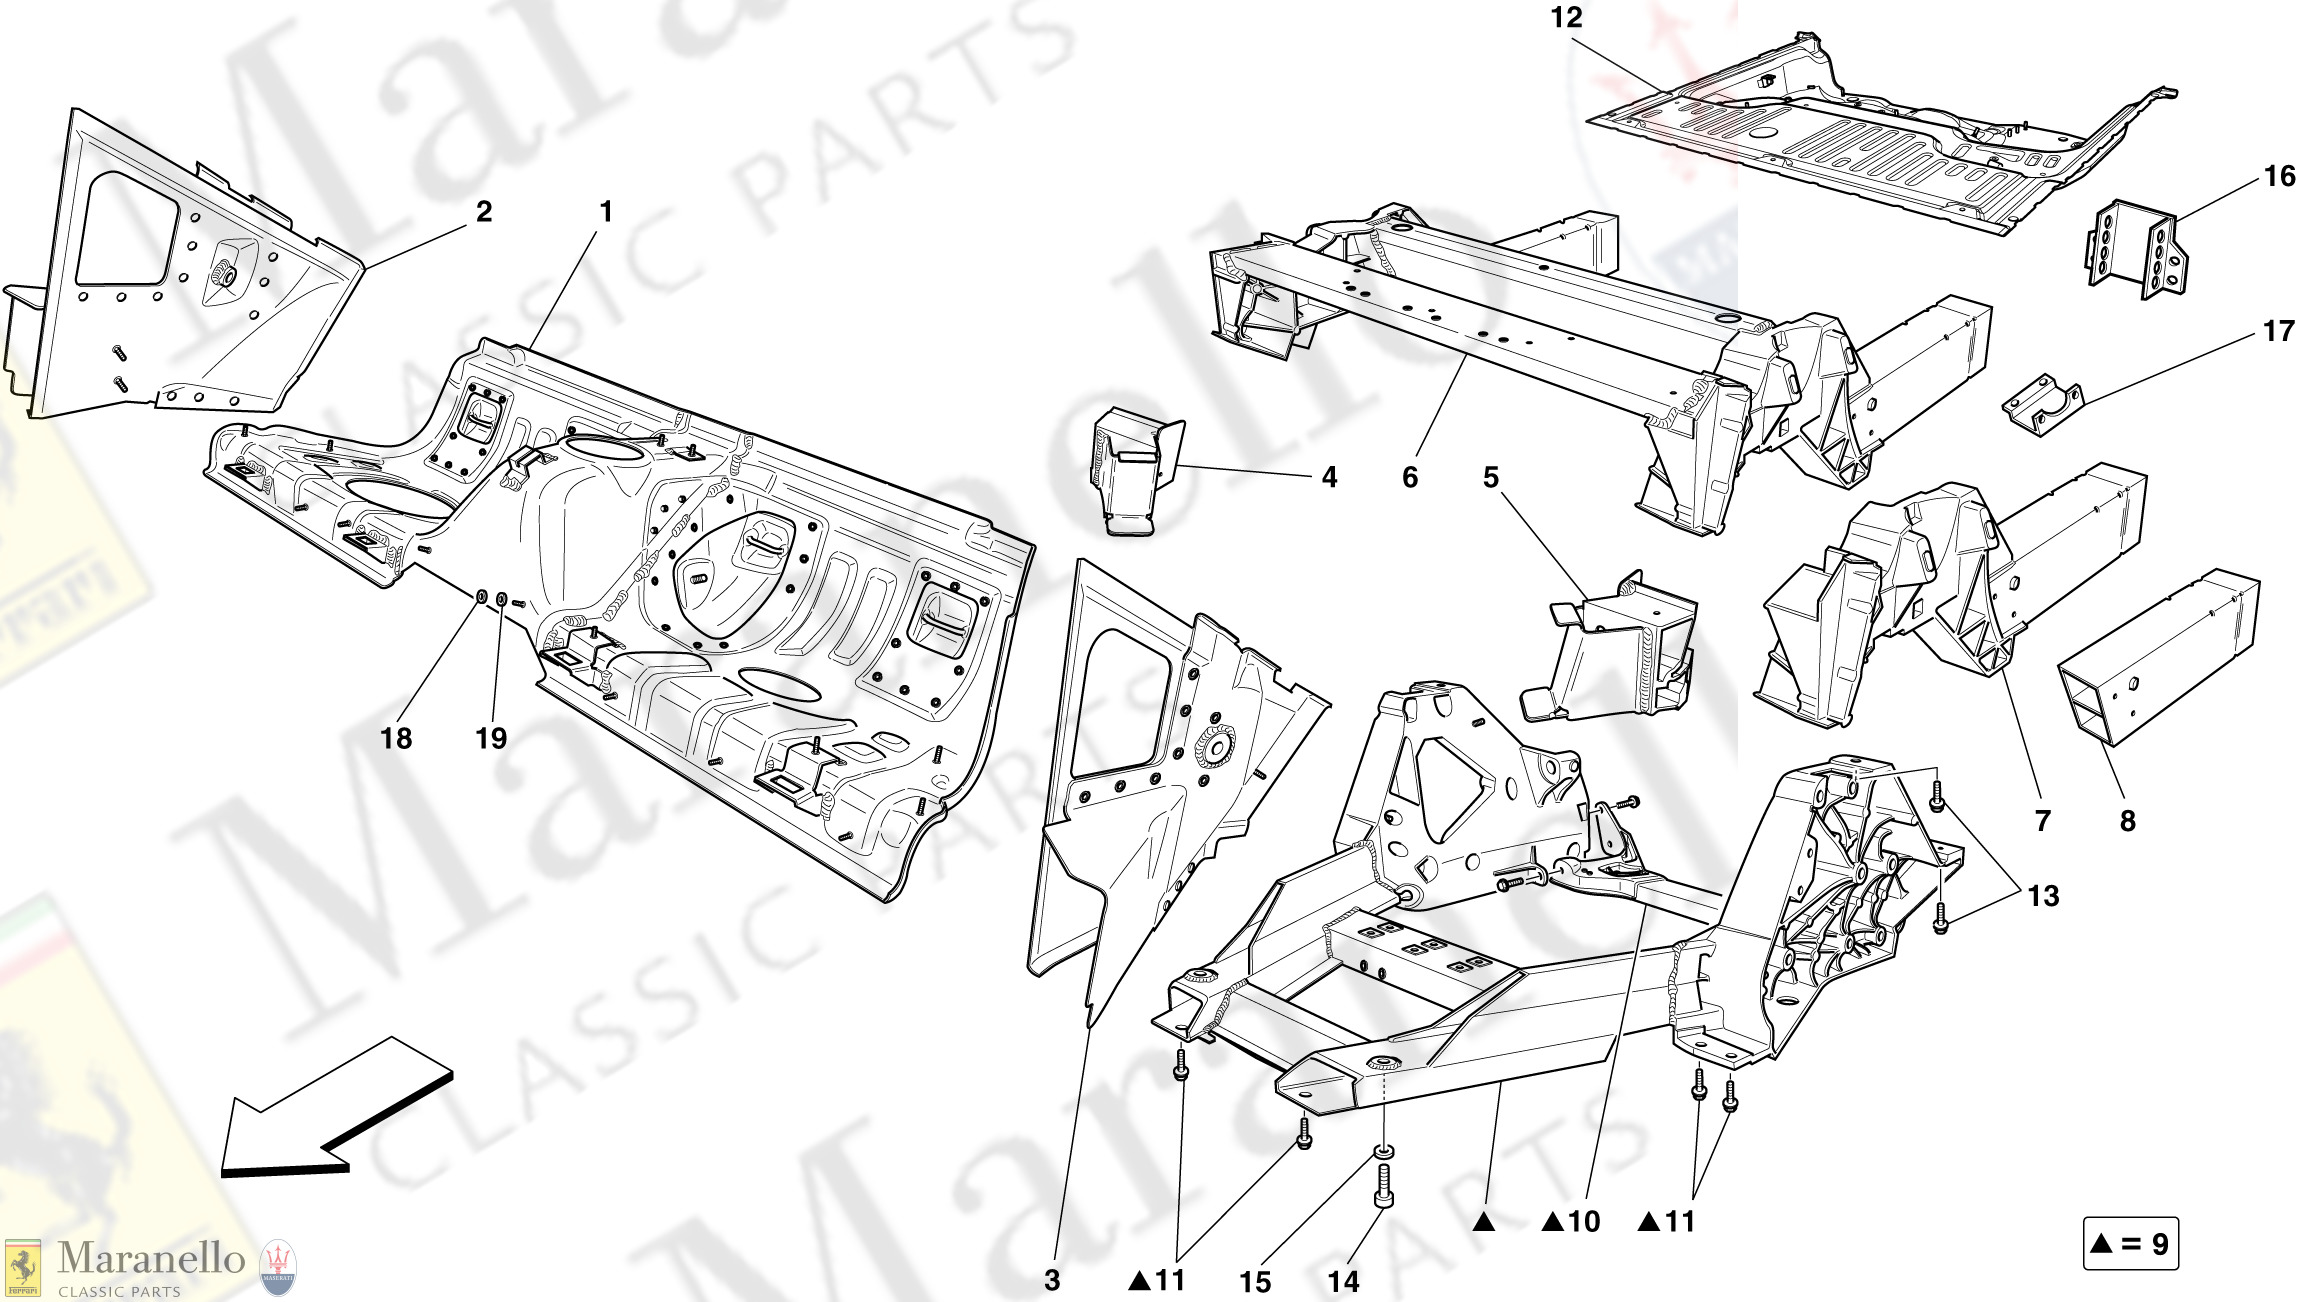 110 - REAR STRUCTURES AND CHASSIS BOX SECTIONS -Applicable up to Ass.ly No. 103178-